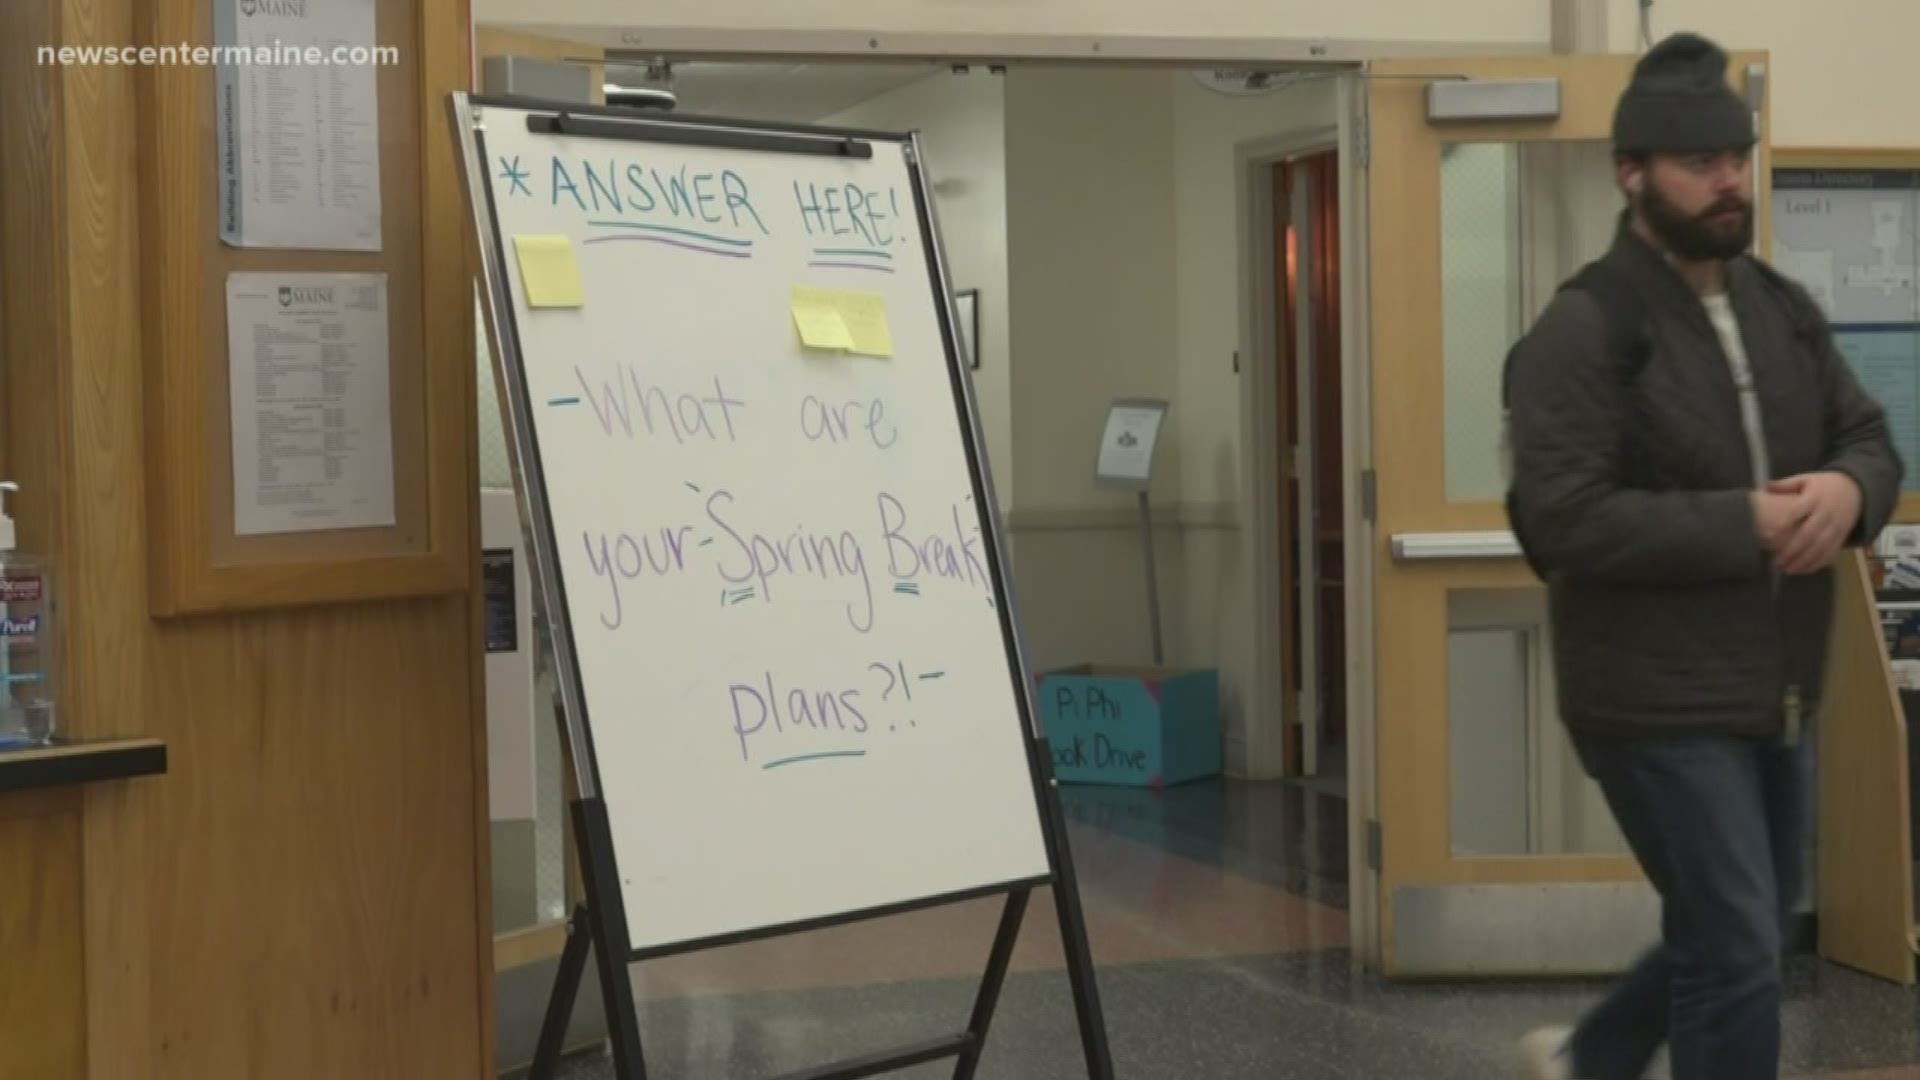 UMaine system encourages students to stay on campus over spring break